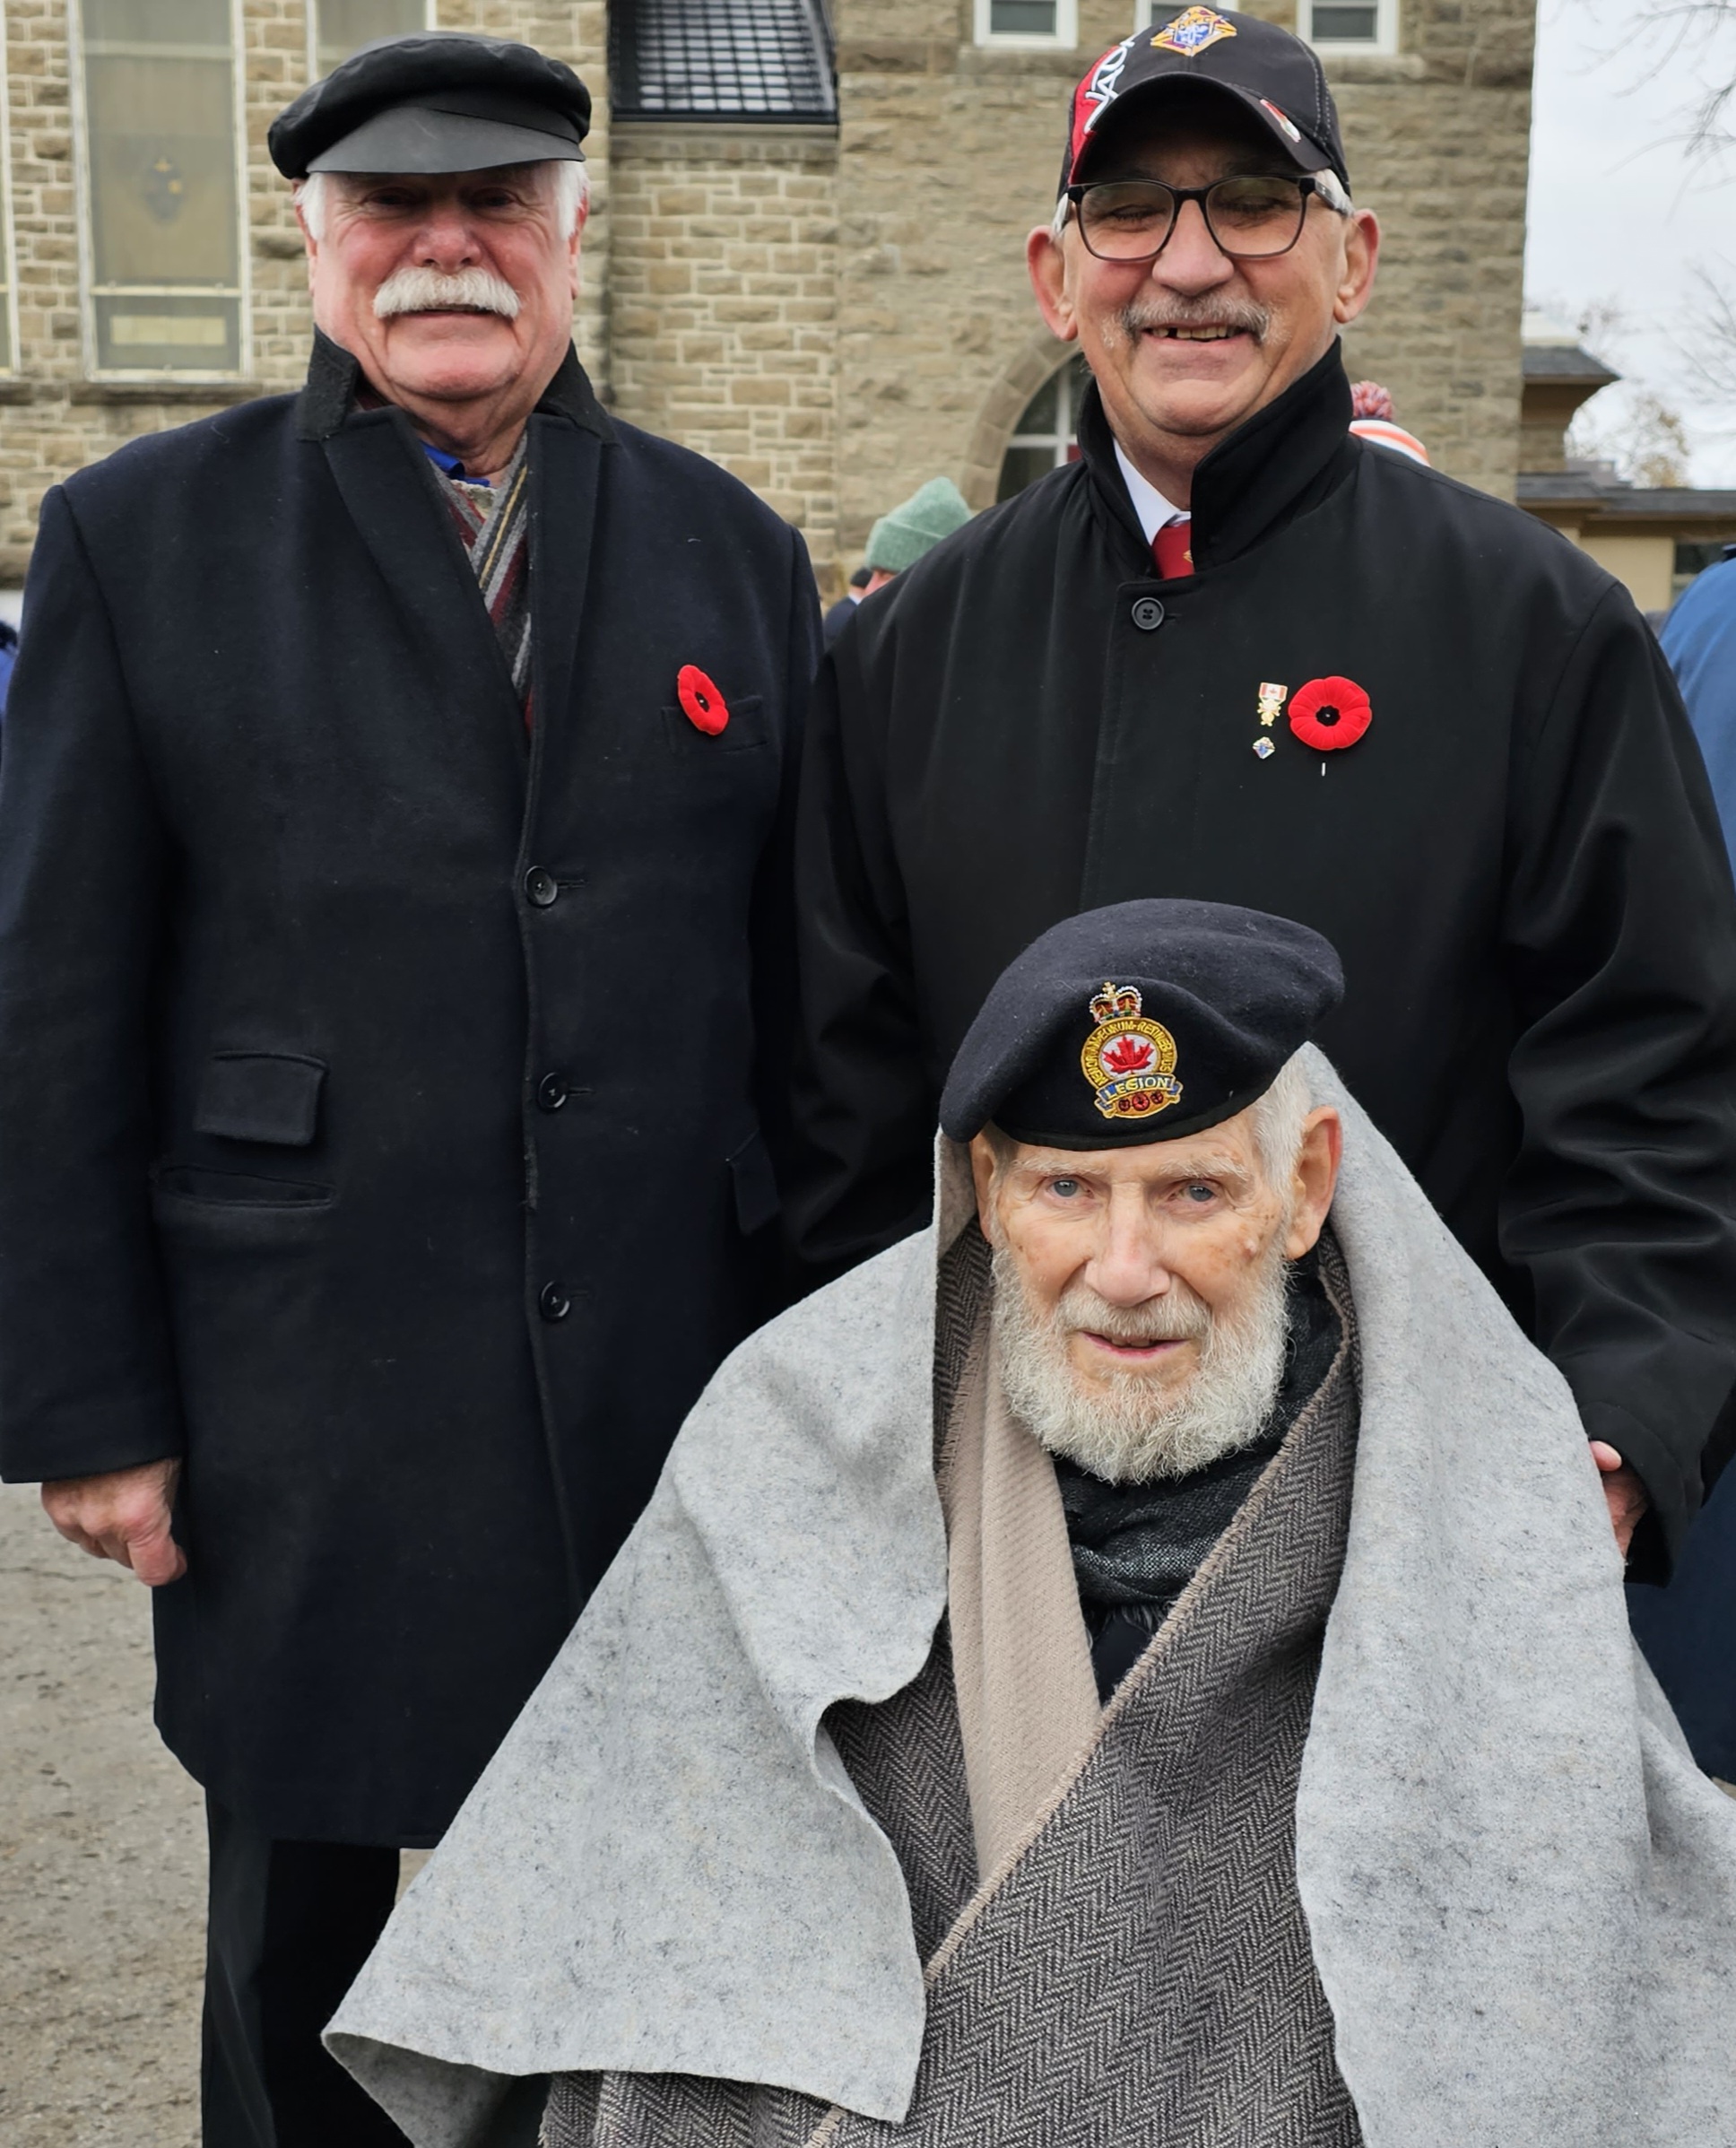 From L-R: PGK Mike Lalonde and GK Dale Tuepah of Dr. J. F. Dunn Council 5153 and with Council Member Jim Strickland (Age 97) a WW II Veteran at the annual Remembrance Day Ceremony in Carleton Place (Ontario)